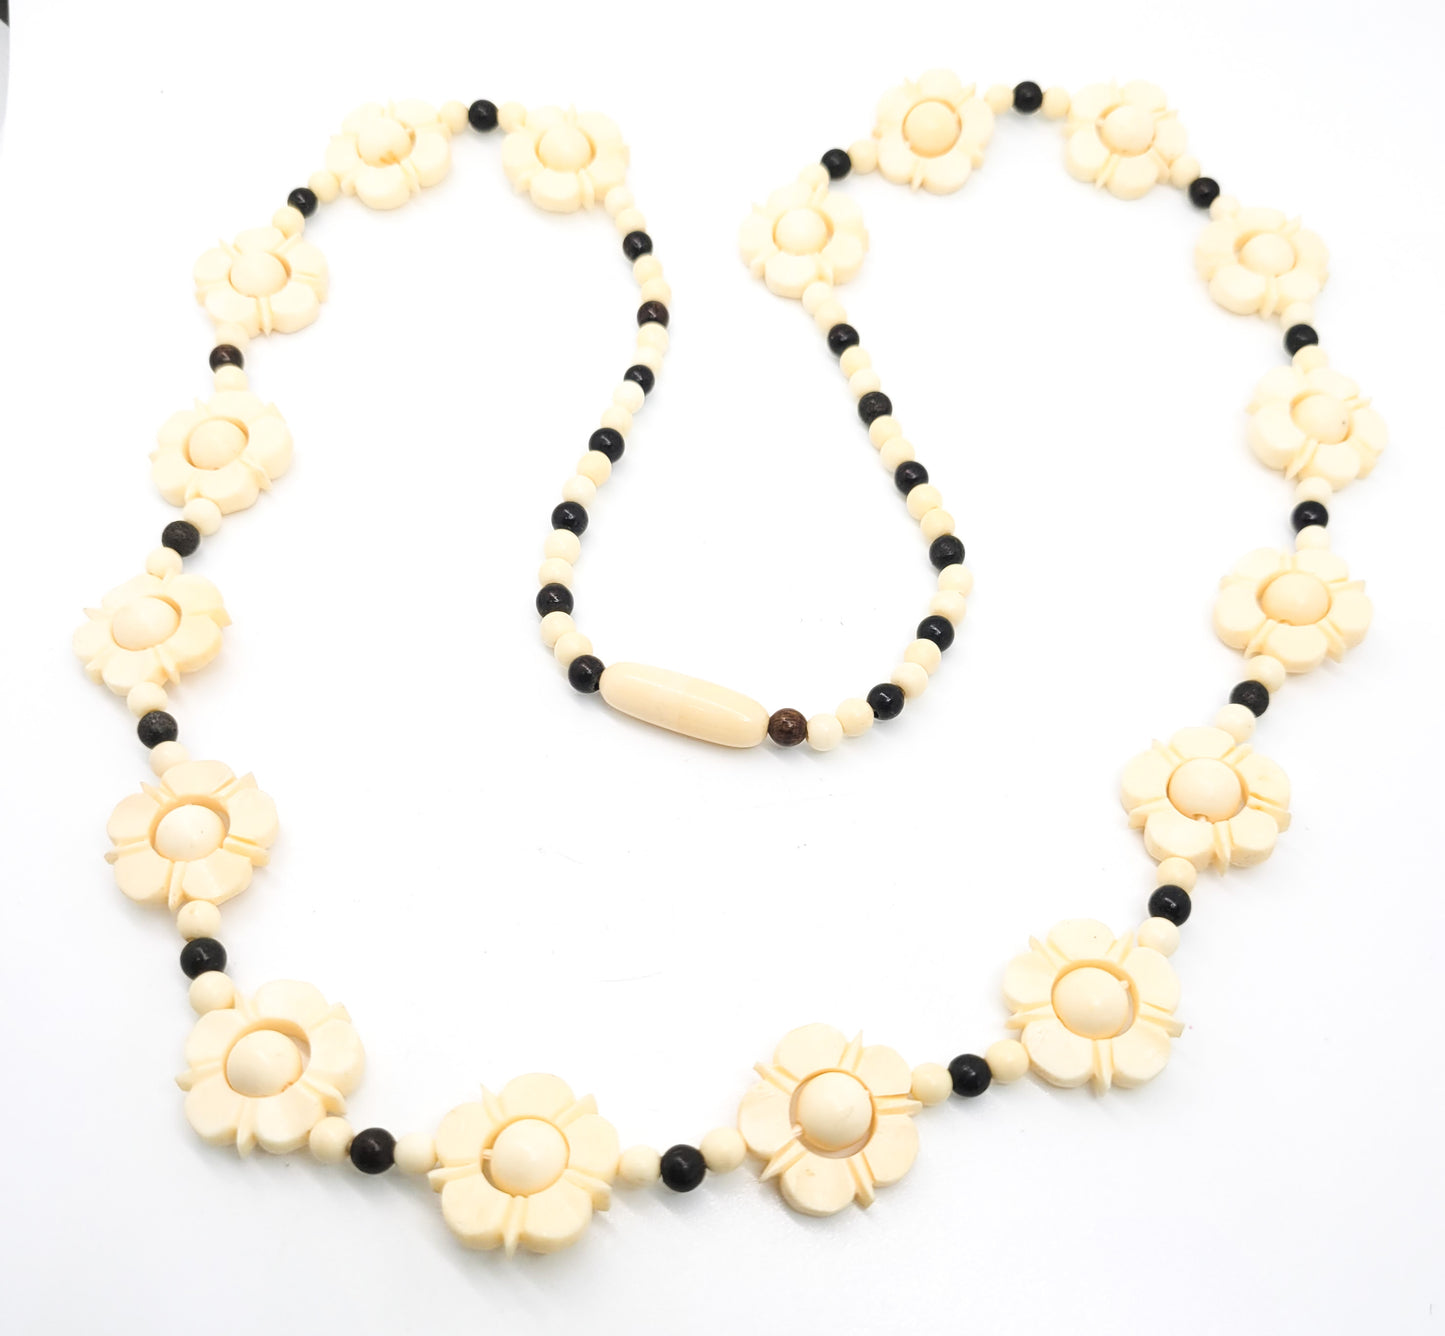 Carved natural black and white articulated vintage flower daisy chain beaded necklace